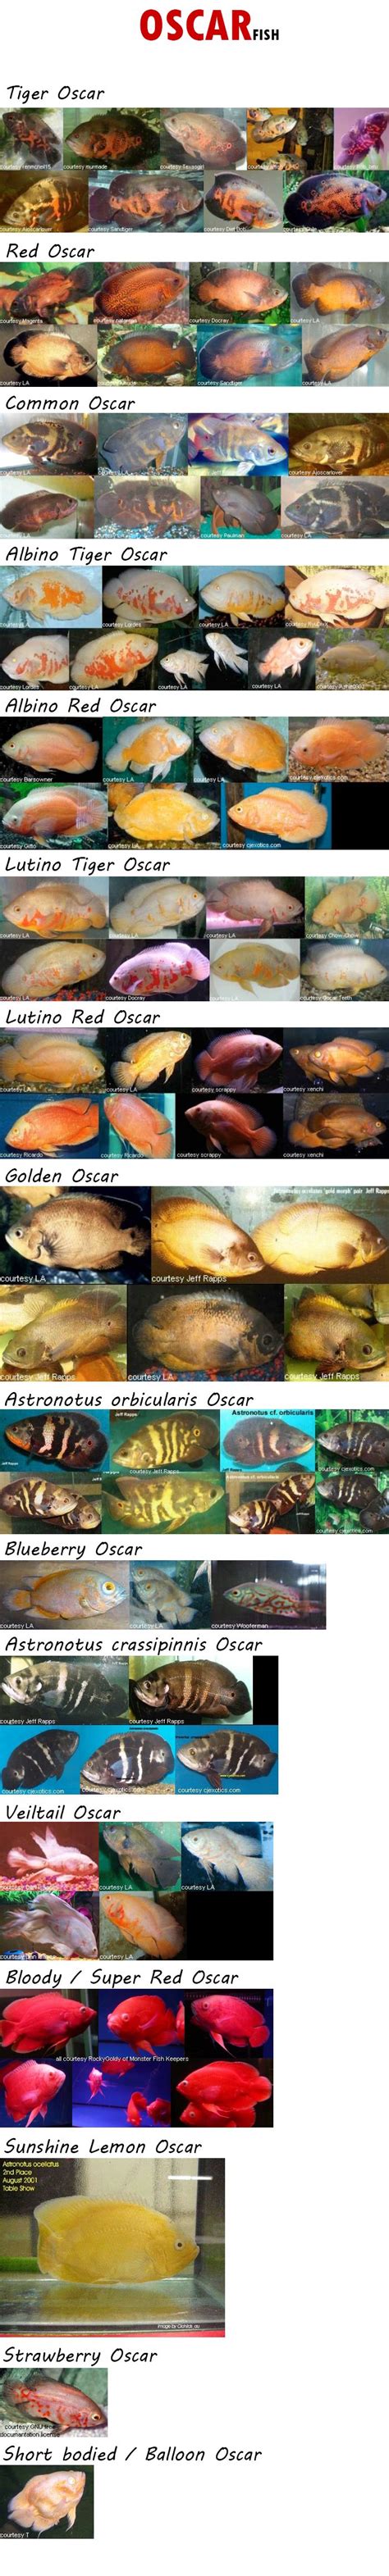 The oscar fish can become large, and most of the species can reach up to 12 inches. Oscar Varieties | Oscar Fish | Pinterest | Pets, My family ...